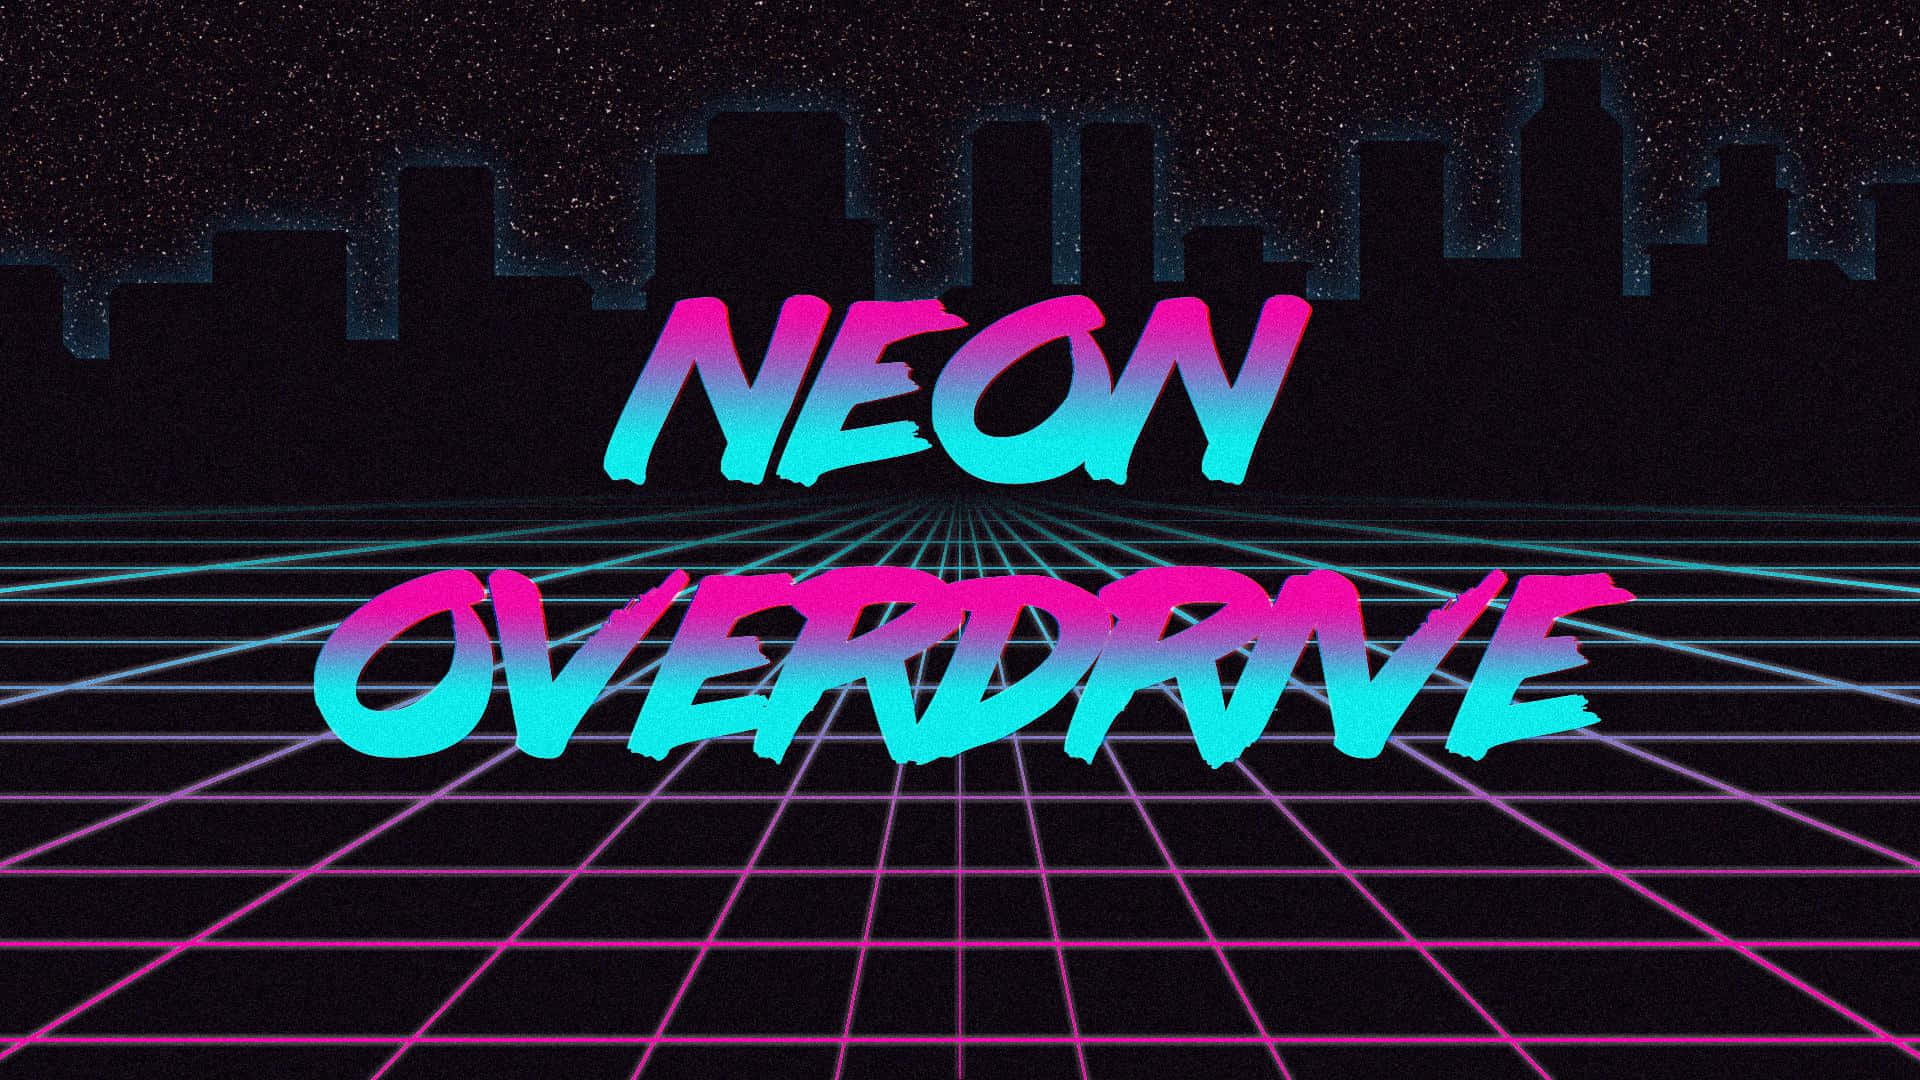 "Bring Back the Vibrancy&Stylishness of the 80s with Neon!" Wallpaper